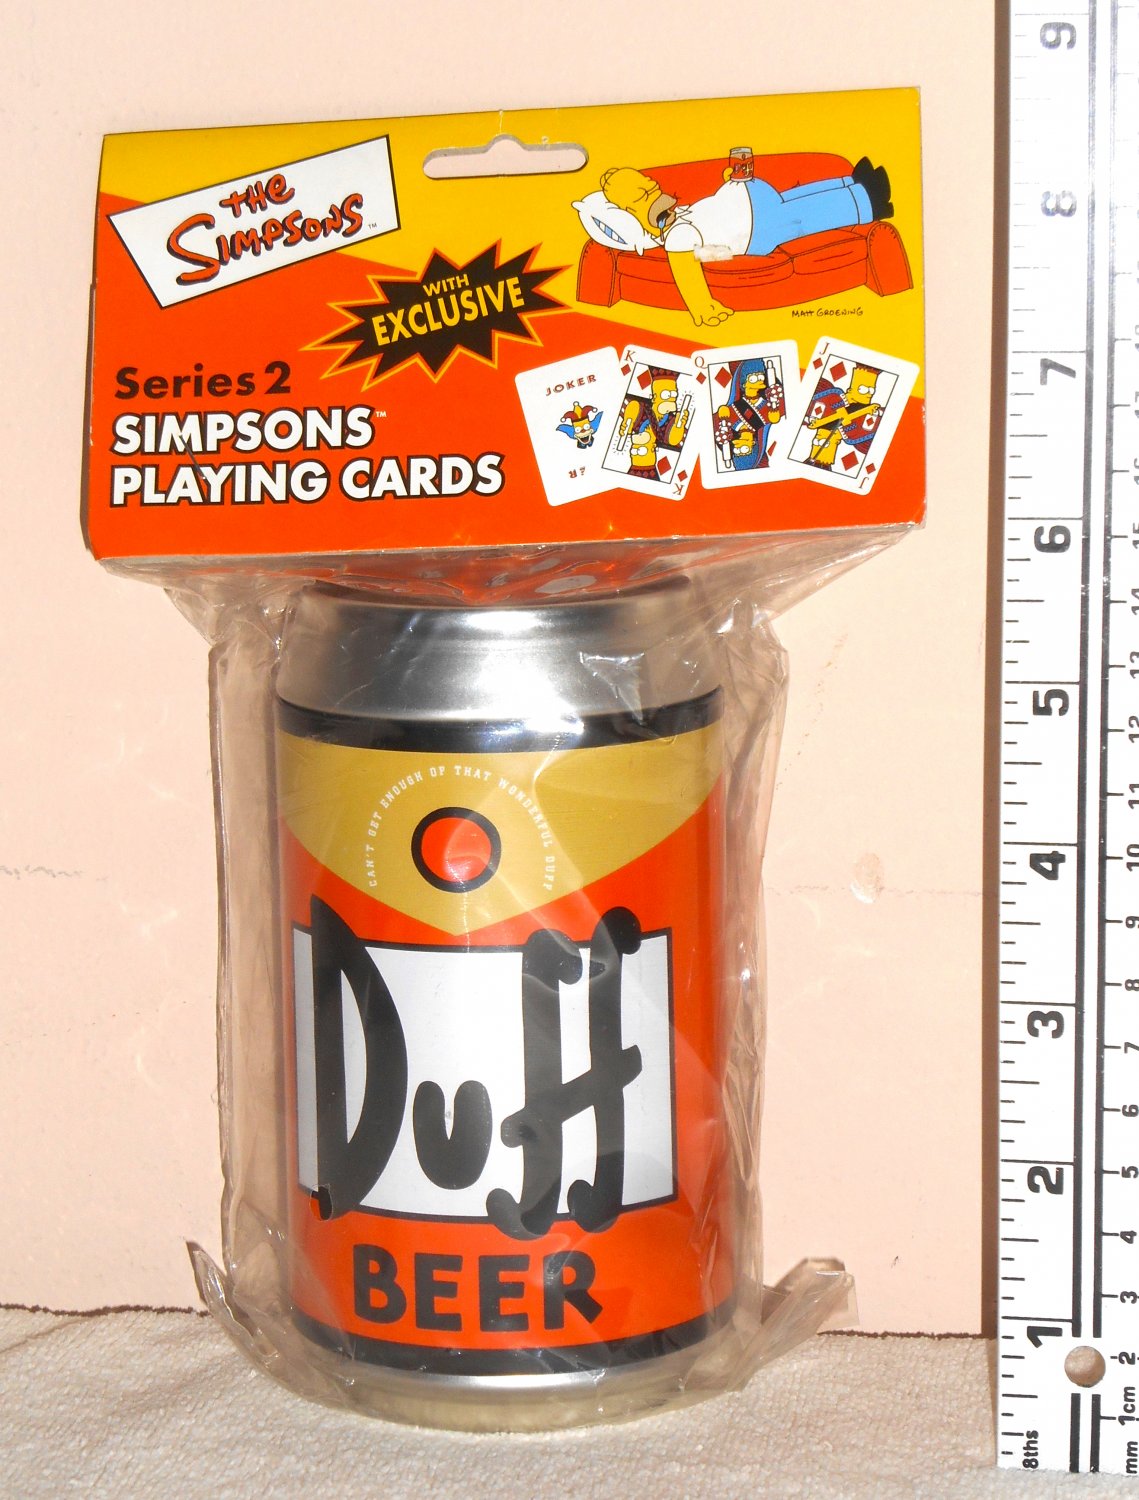 The Simpsons Duff Beer Playing Cards Series 2 Duff Tin Can Container Rix Products 4783 NIP 2002